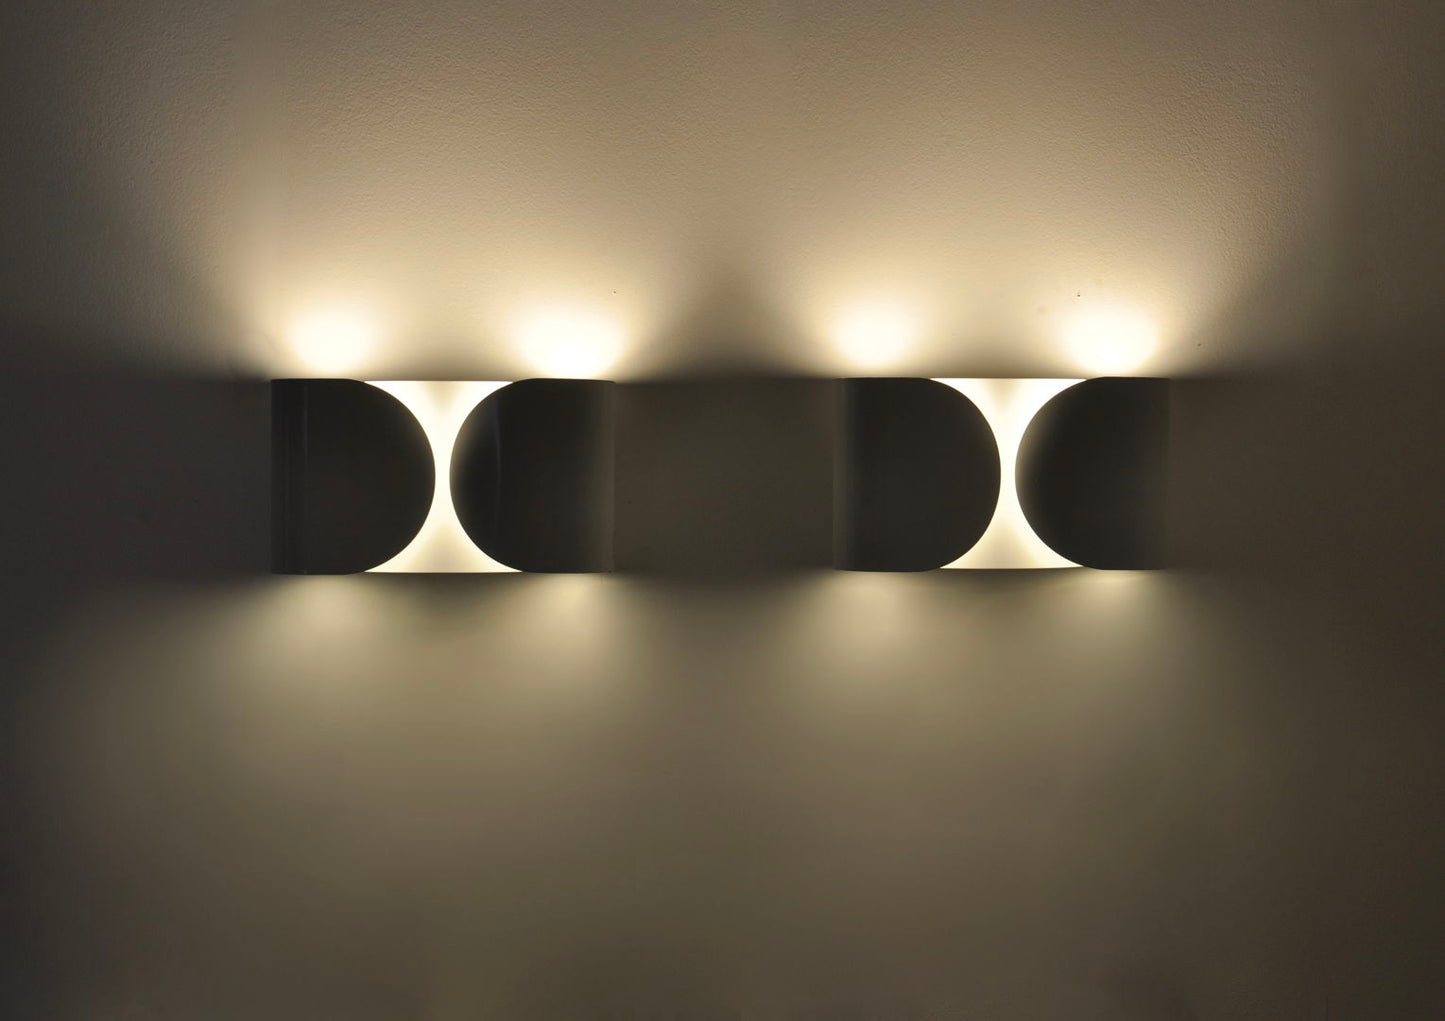 White Foglio Wall Lamps by Tobia & Afra Scarpa for Flos, 1960s, Set of 2